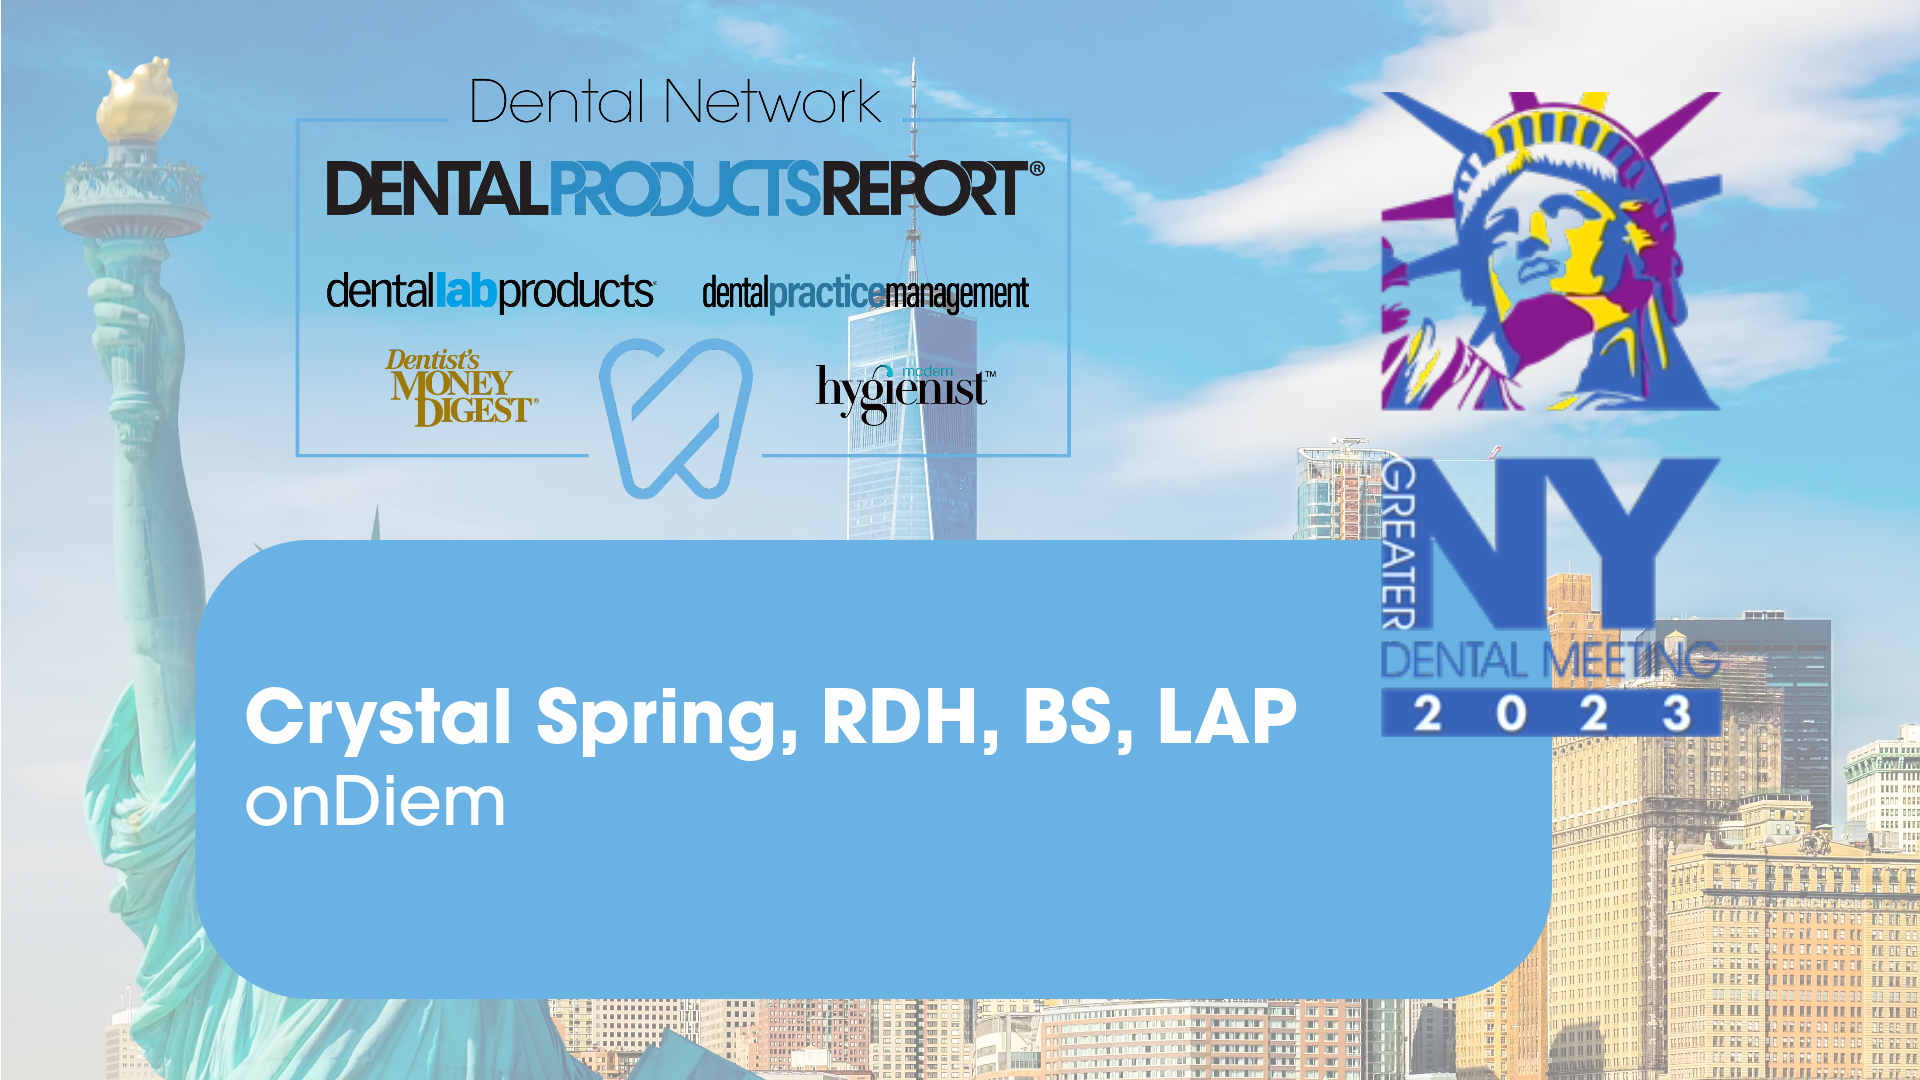 Greater New York Dental Meeting 2023 – Interview with Crystal Spring, RDH, BS, LAP